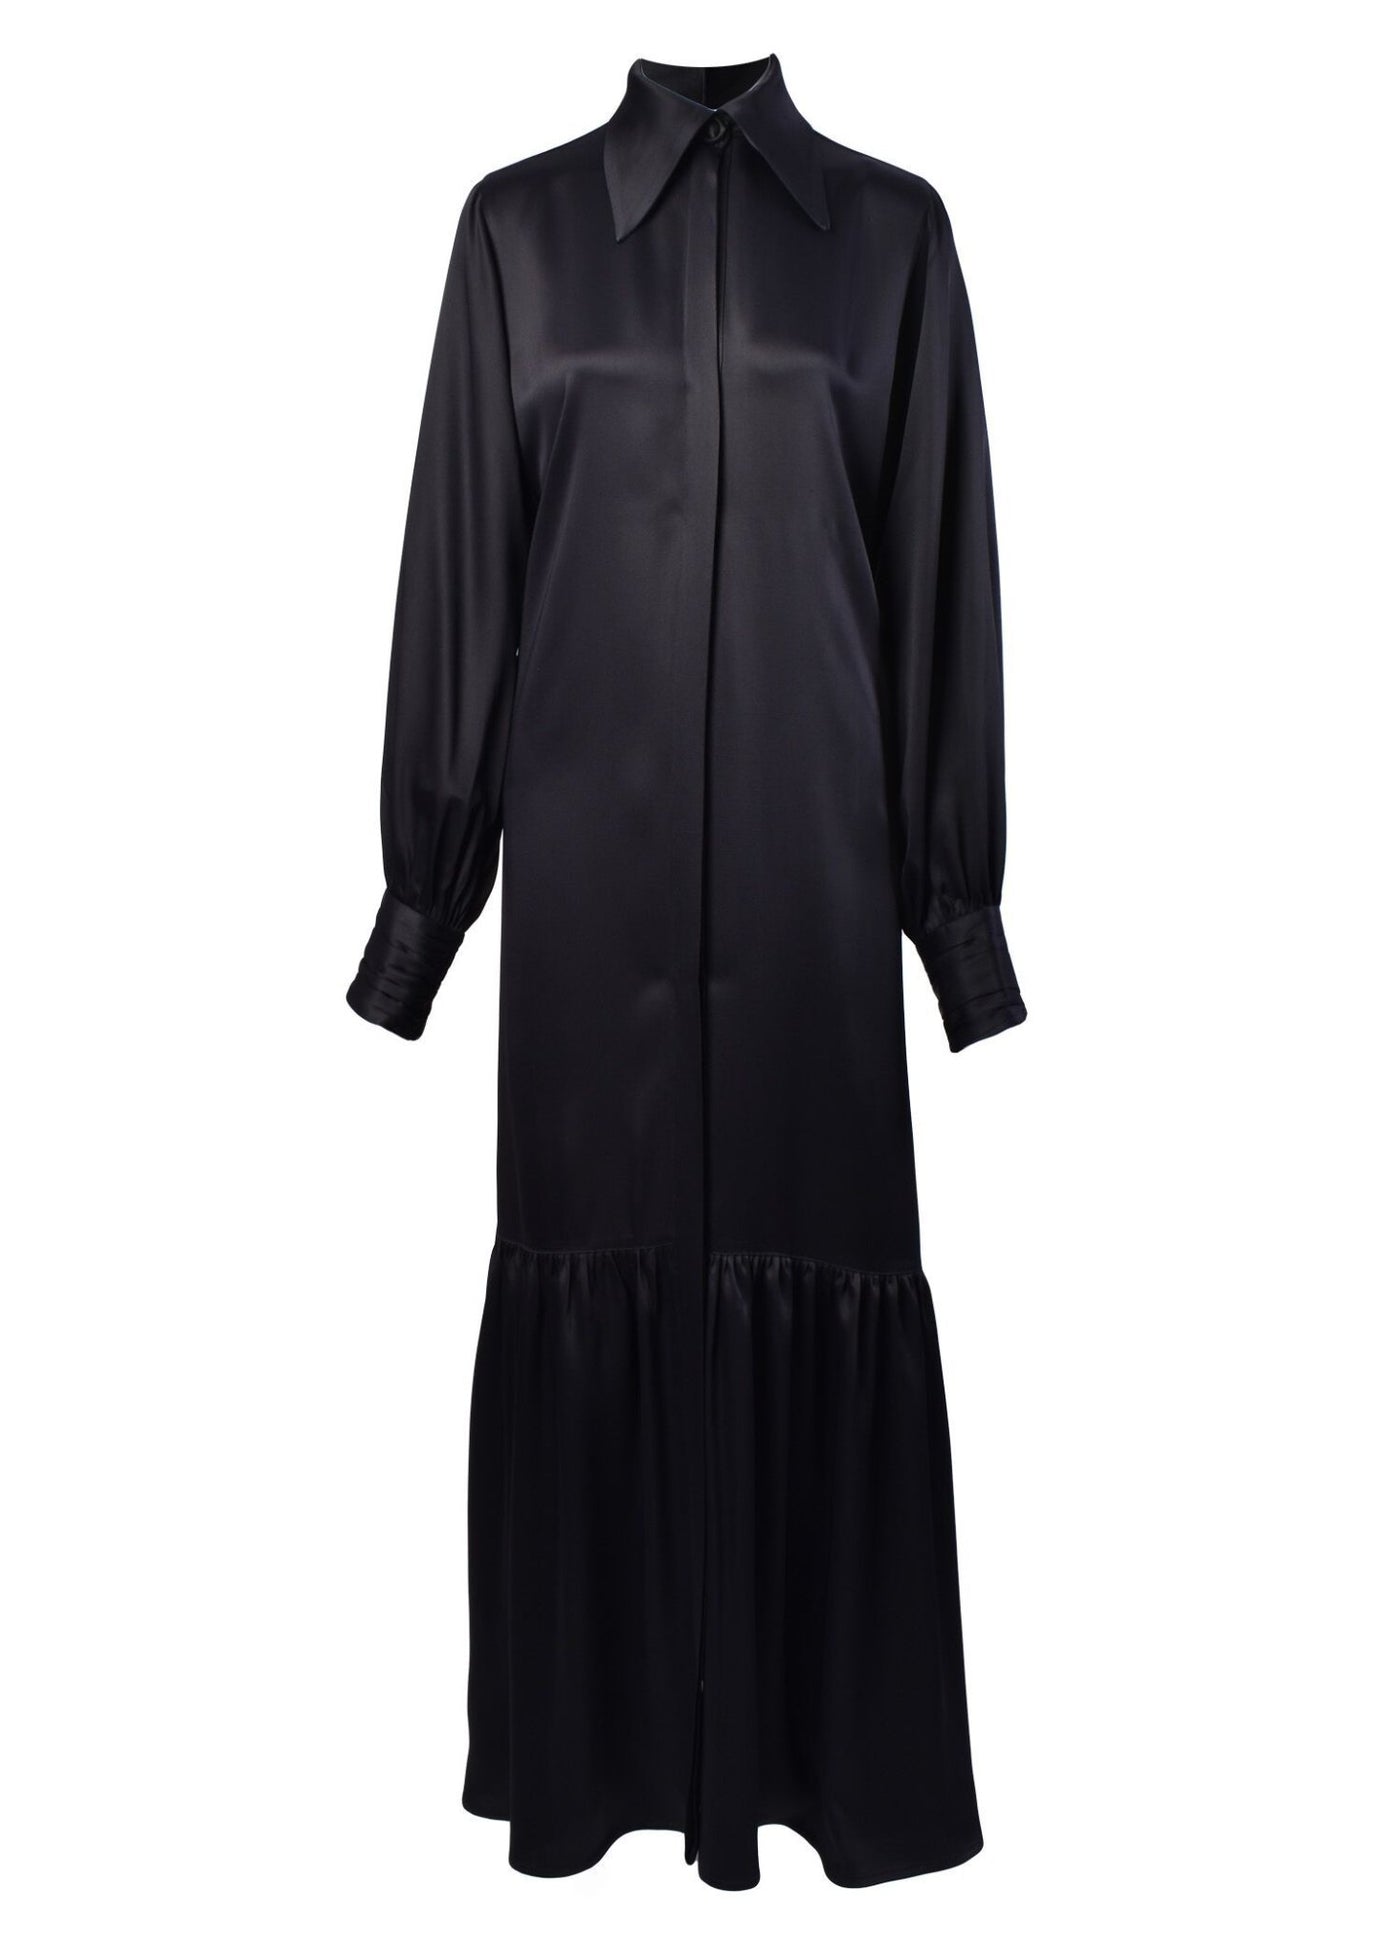 Frown Shirt Dress - The Clothing LoungeNOPIN